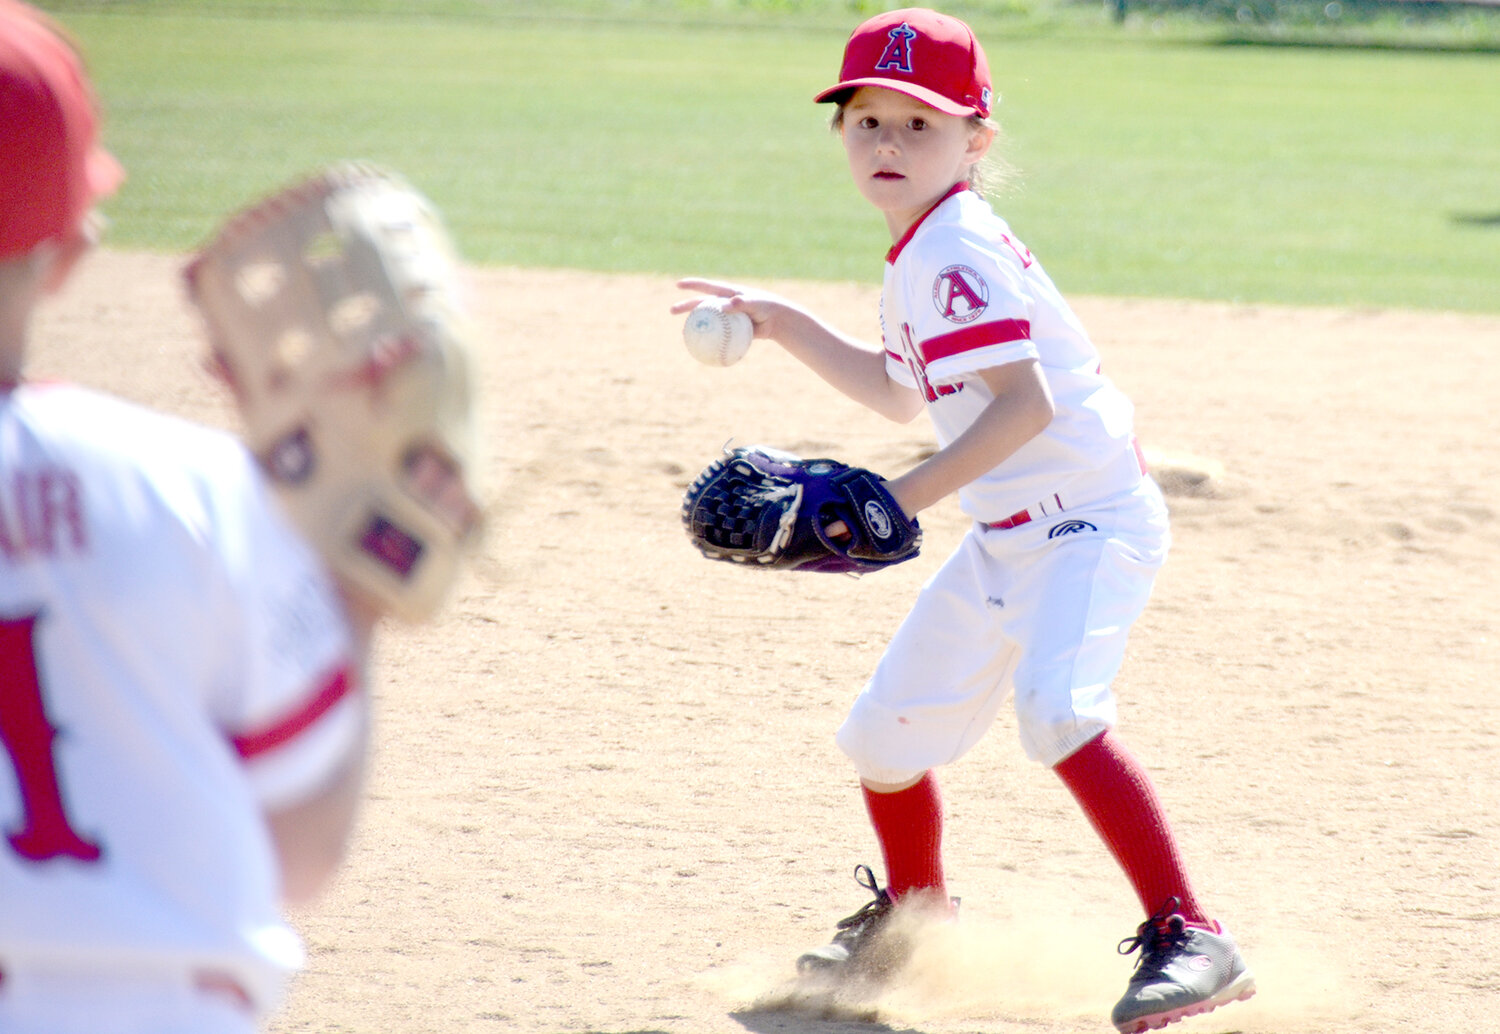 Second baseman Carter Blackburn of the Angels t-ball team throws to first.